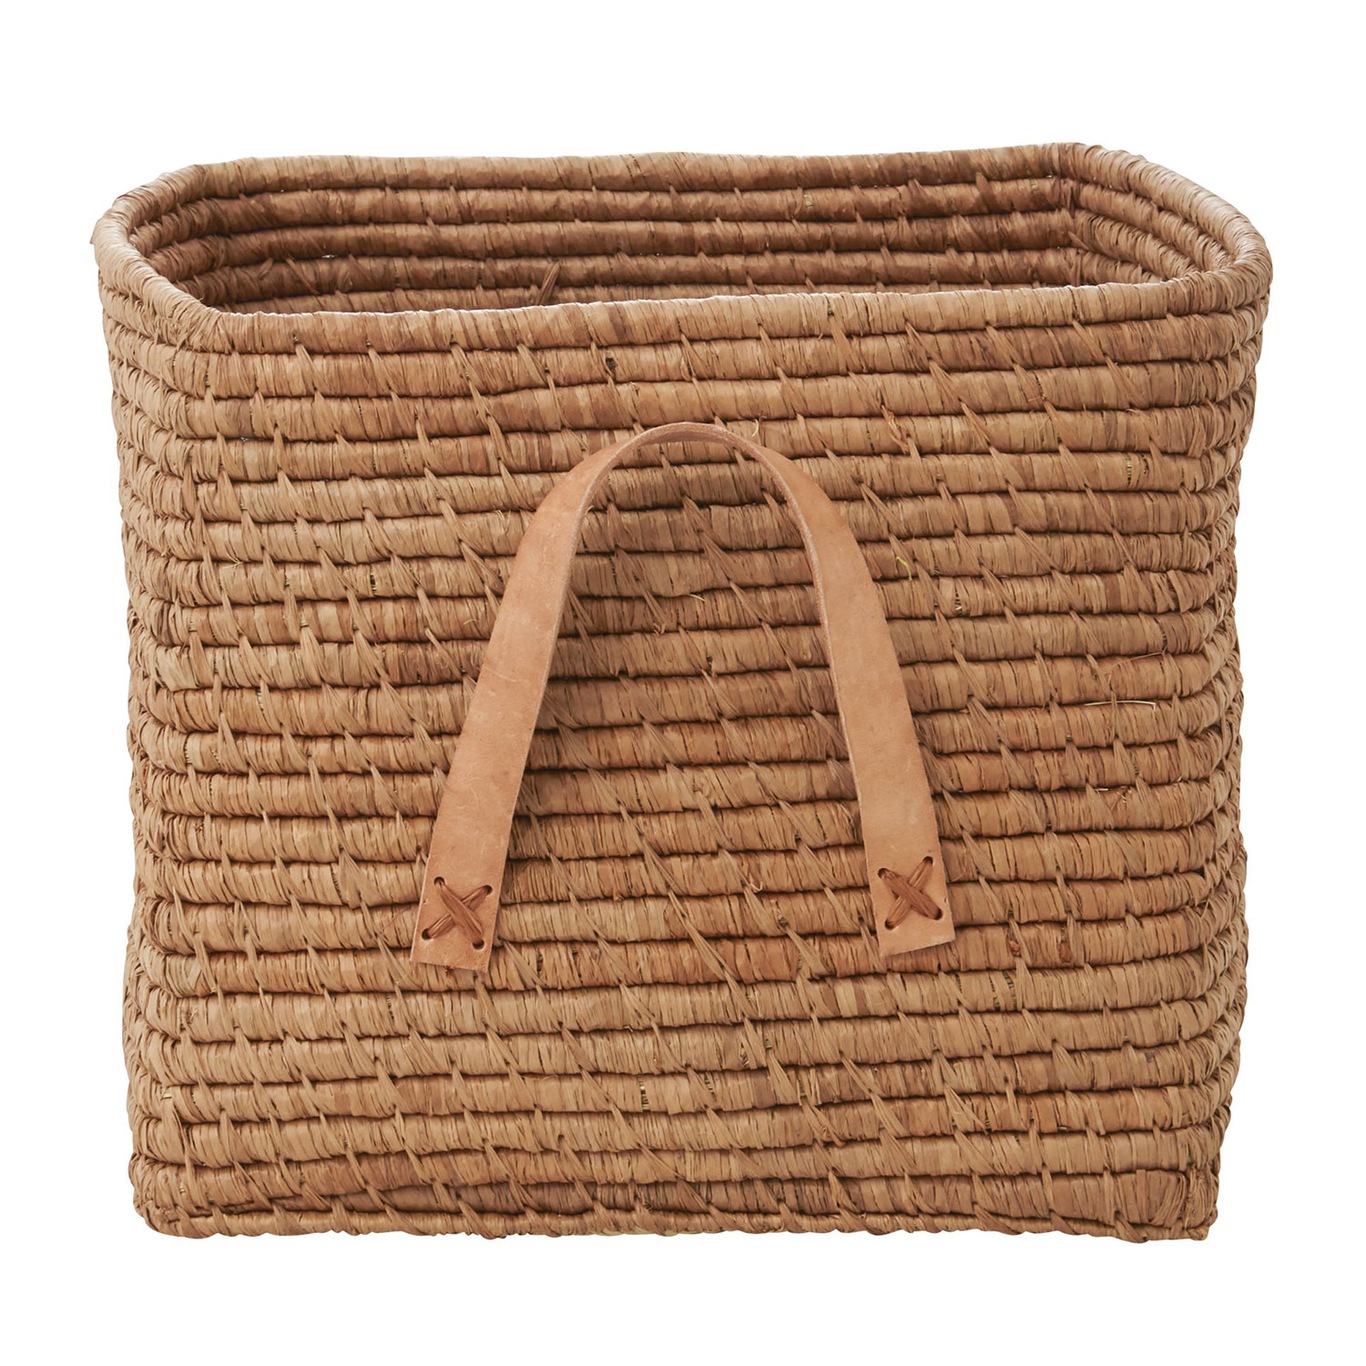 Basket with Leather Handles, Tea